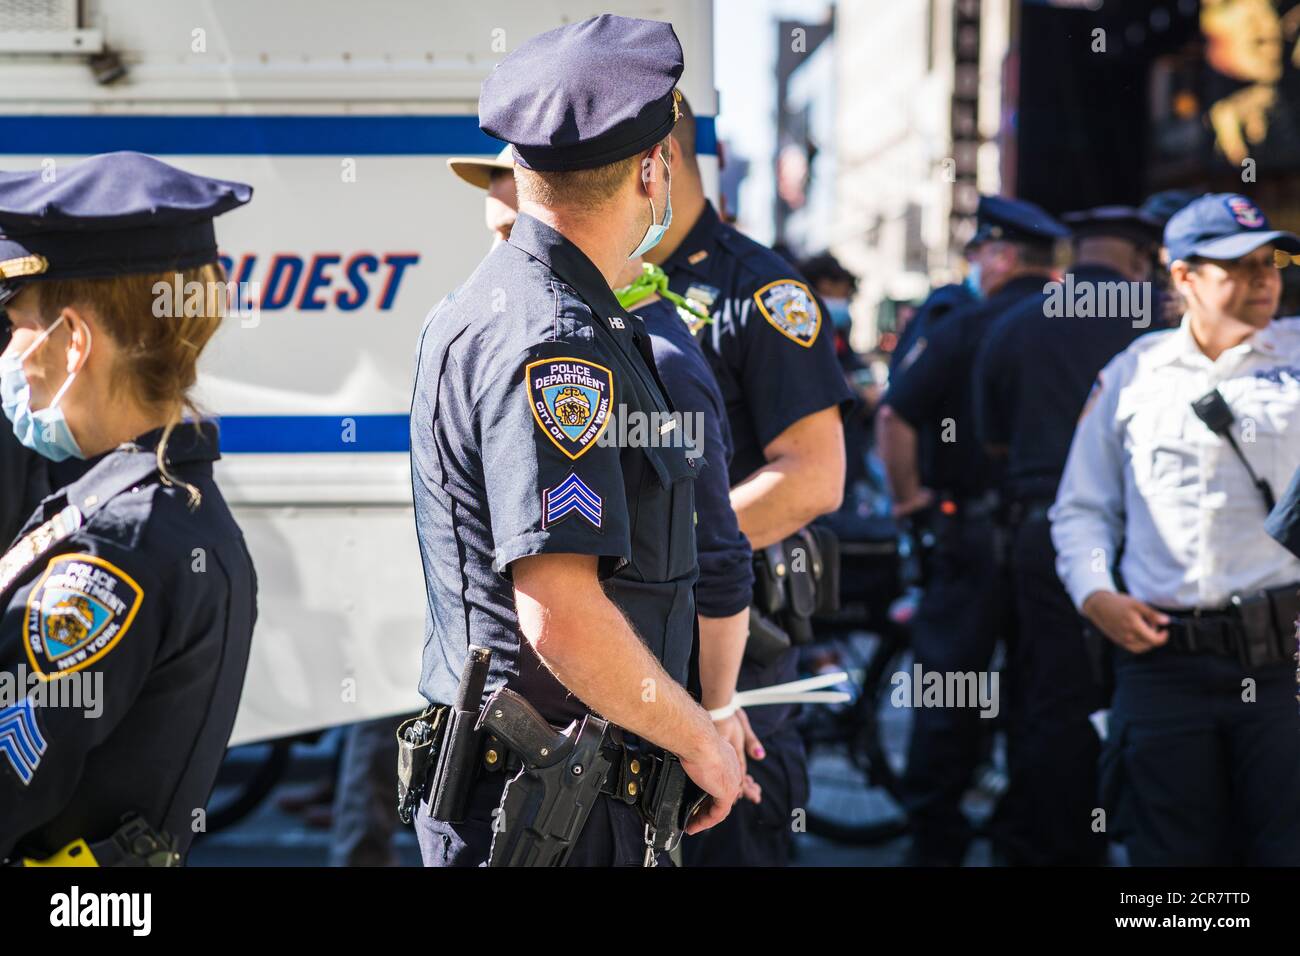 A standoff against NYC Police in Times Square after multiple protesters were arrested in an anti ICE demonstration on Sunday September 20, 2020. Stock Photo